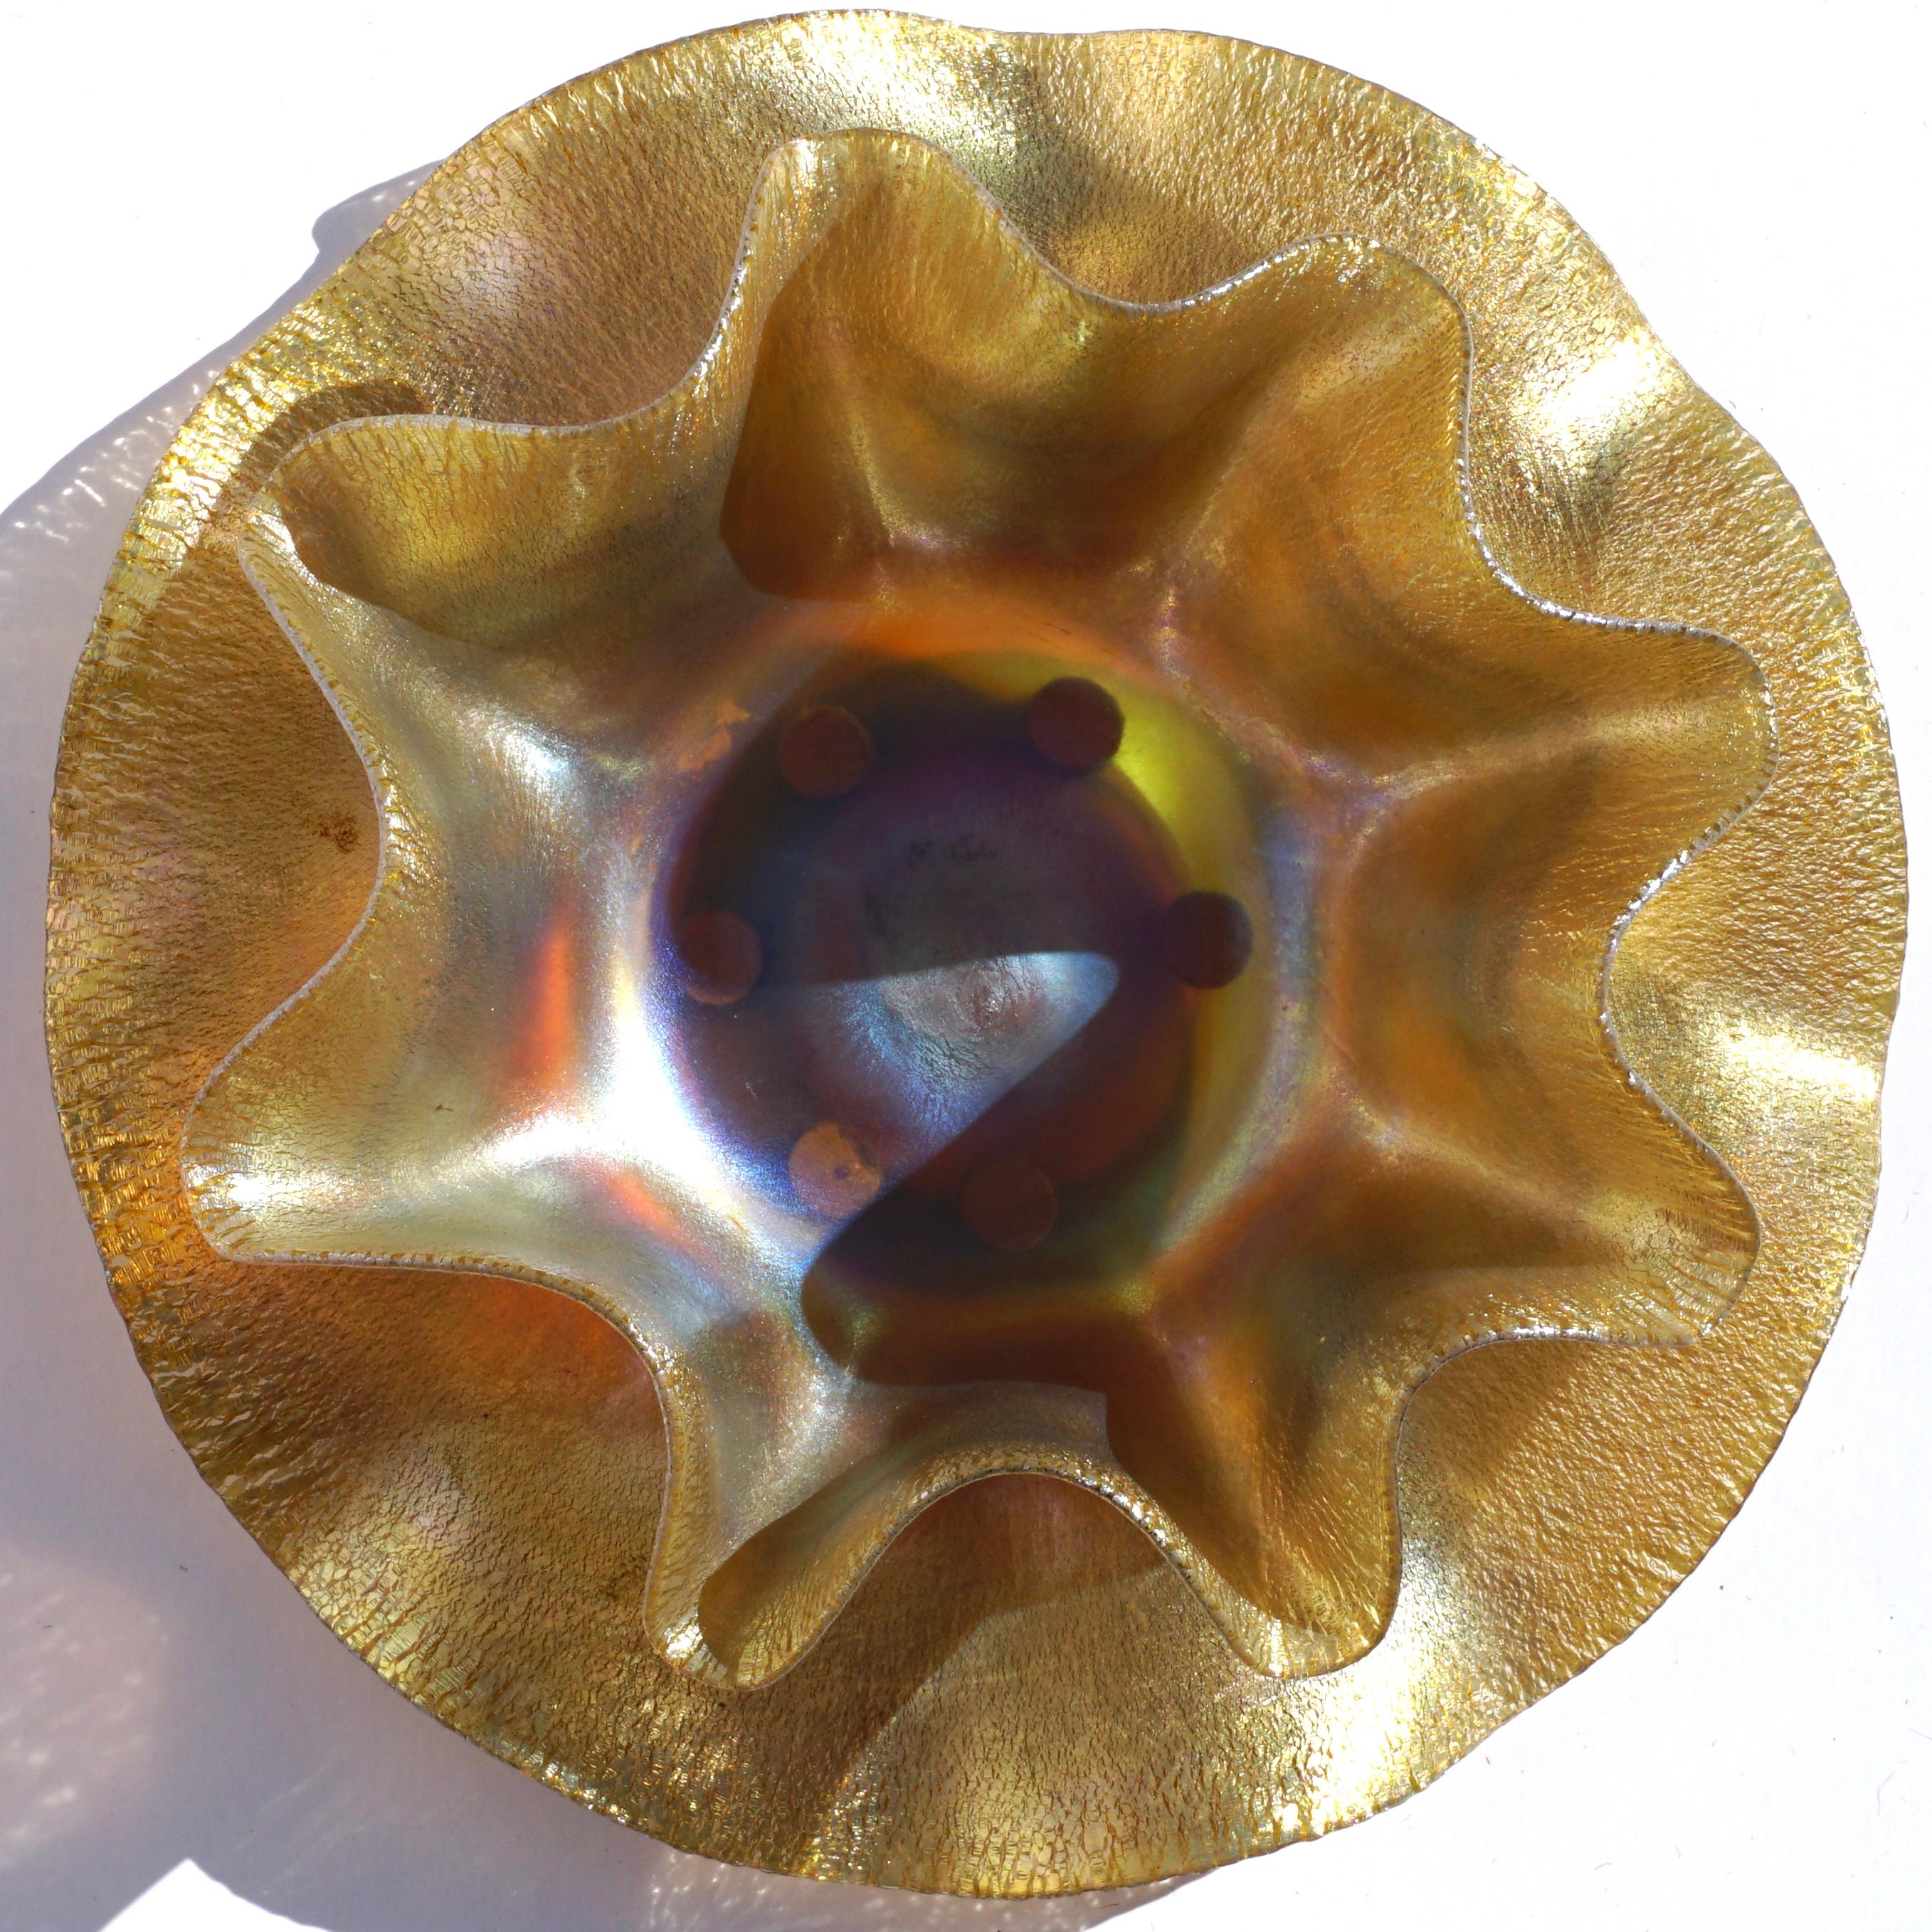 Louis Comfort Tiffany L.C.T. gold aurene stretched glass onion skin ruffle bowl, circa 1900

Bowl measures approximately 2.5 inches high by 6 inches wide (at the widest point).
Plate measures approximately 7 inch diameter.

Outstanding original